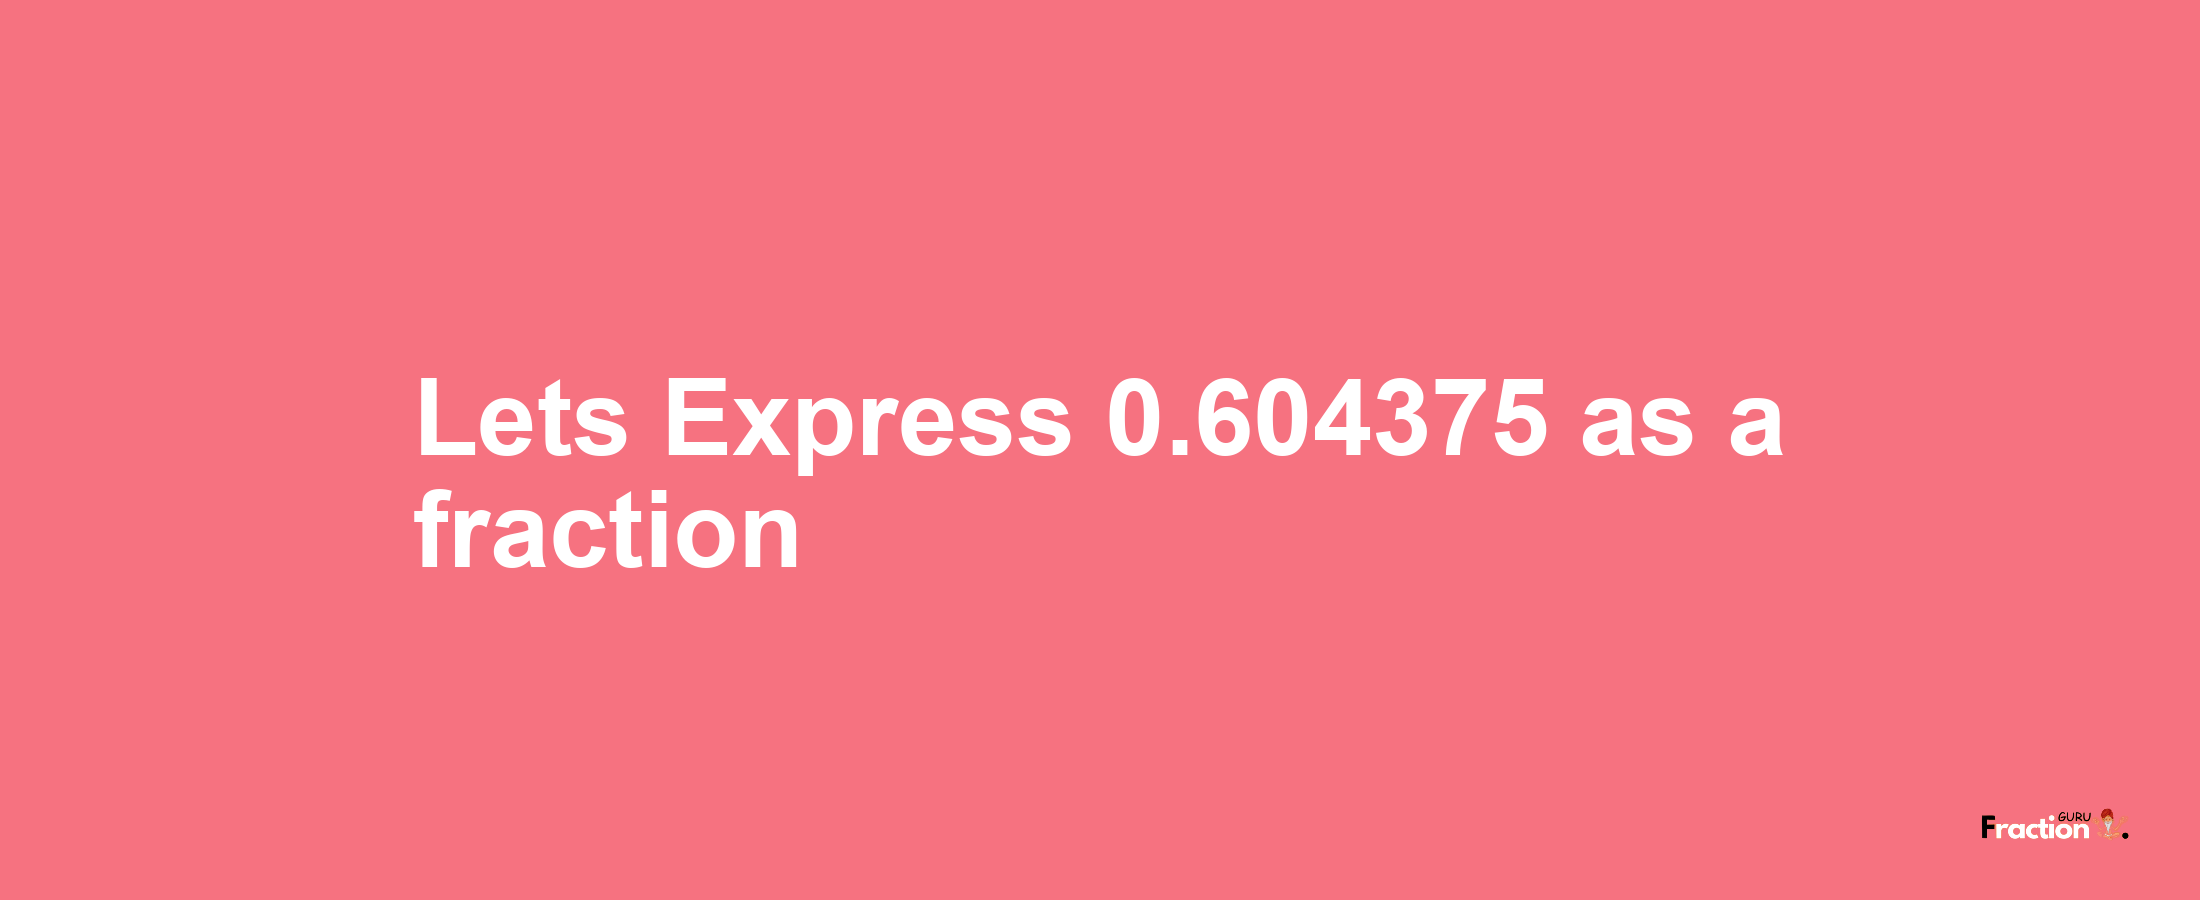 Lets Express 0.604375 as afraction